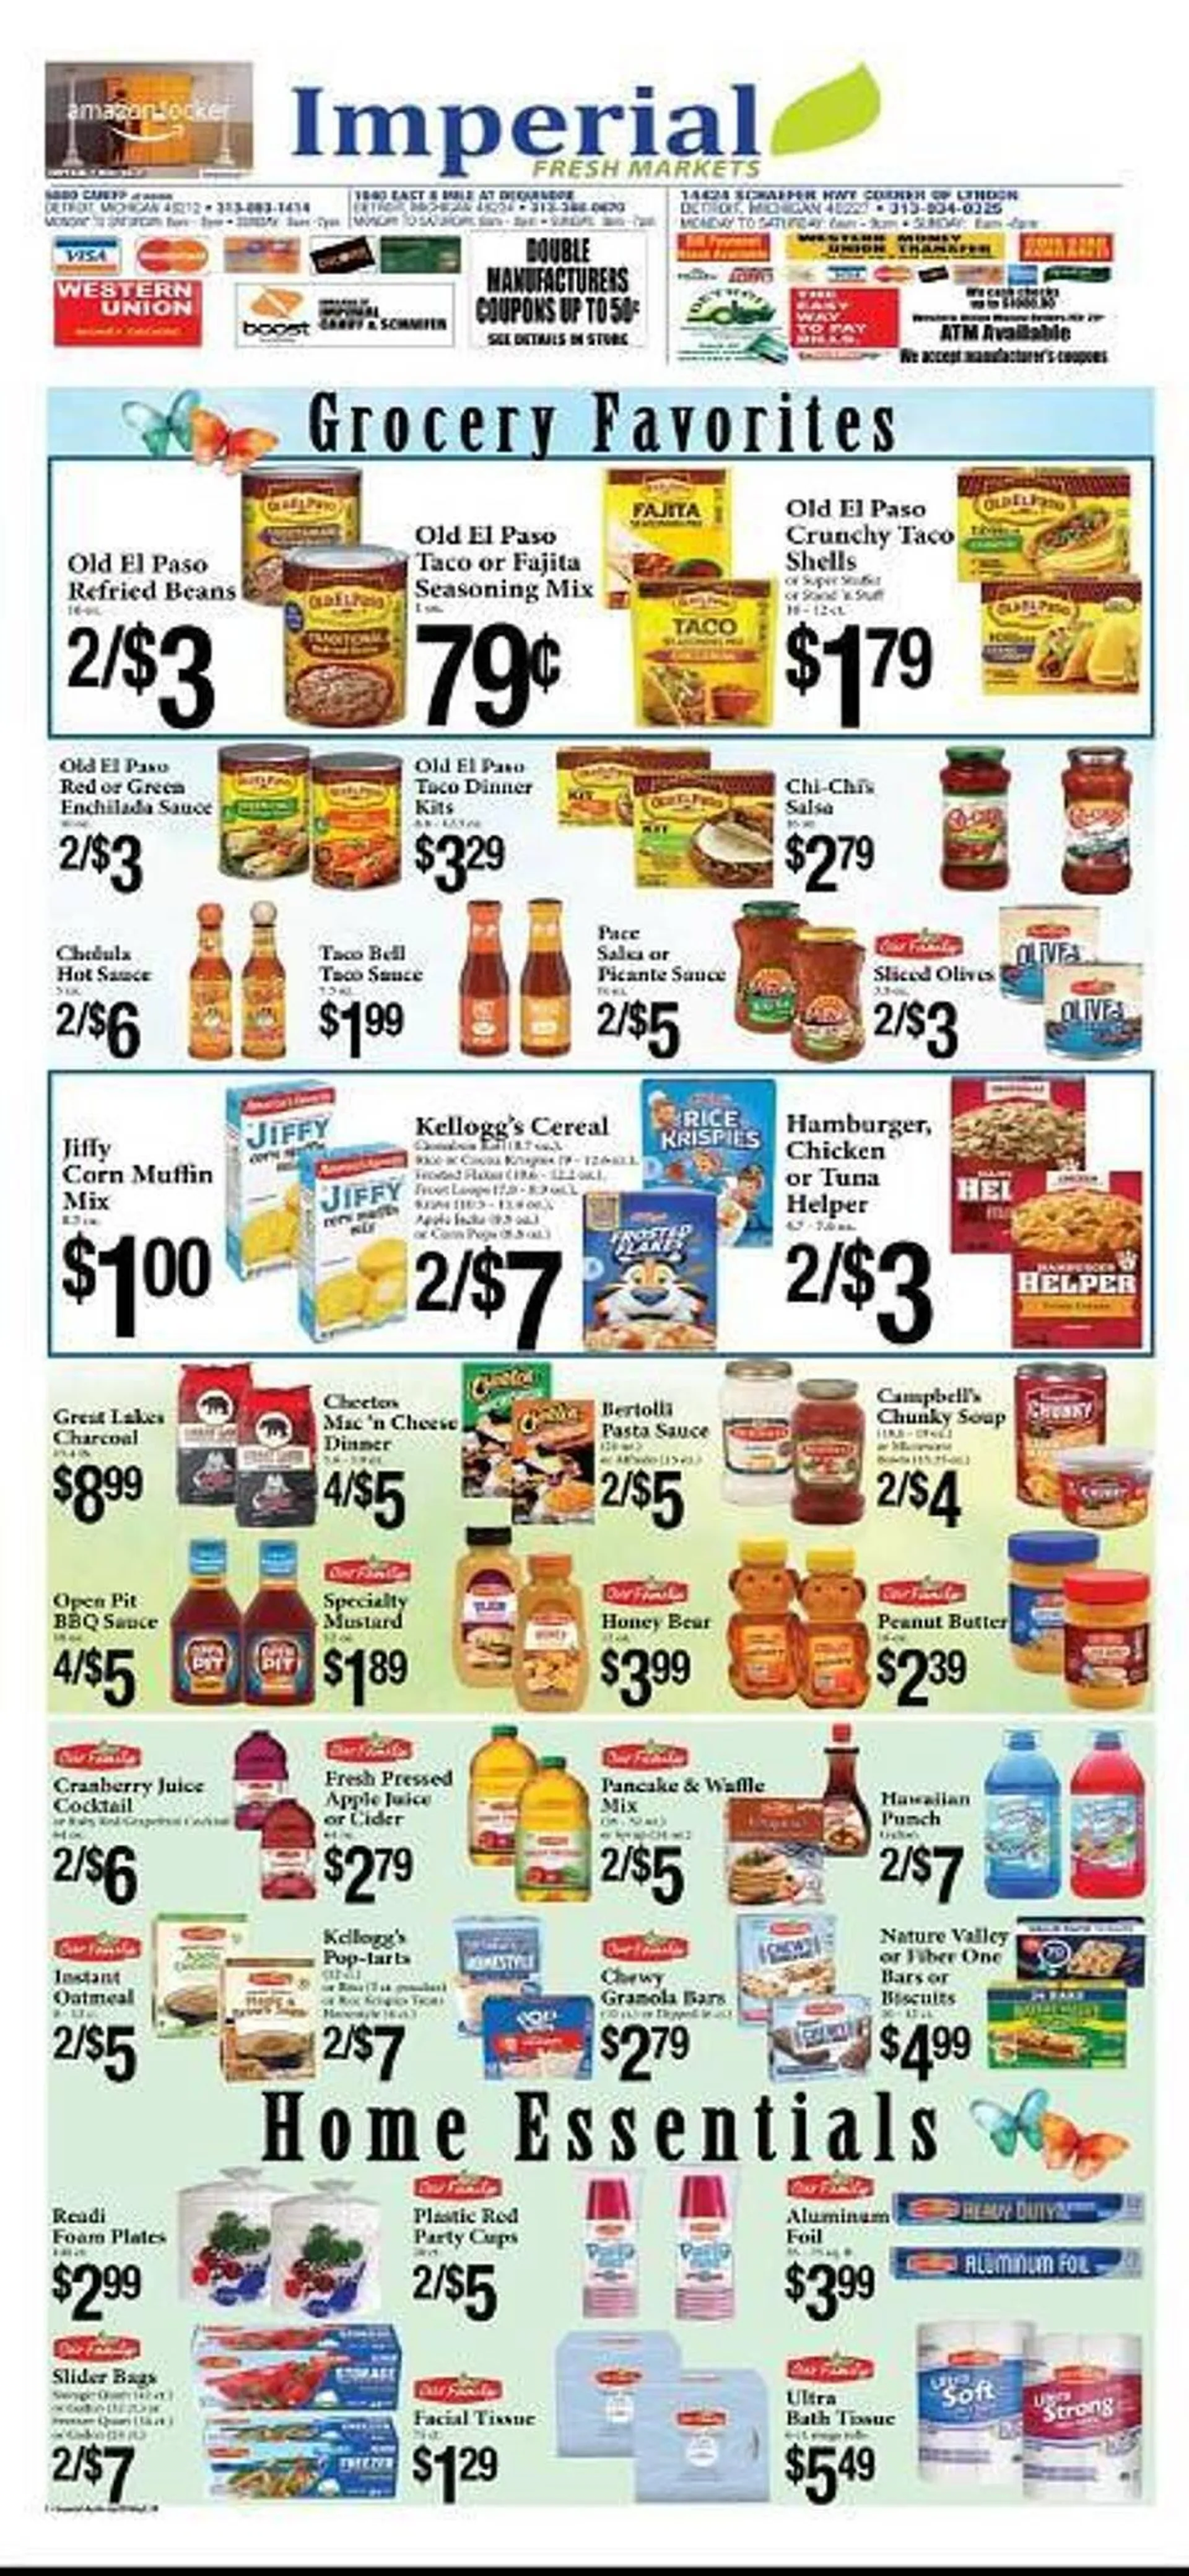 Imperial Fresh Markets Weekly Ad - 2